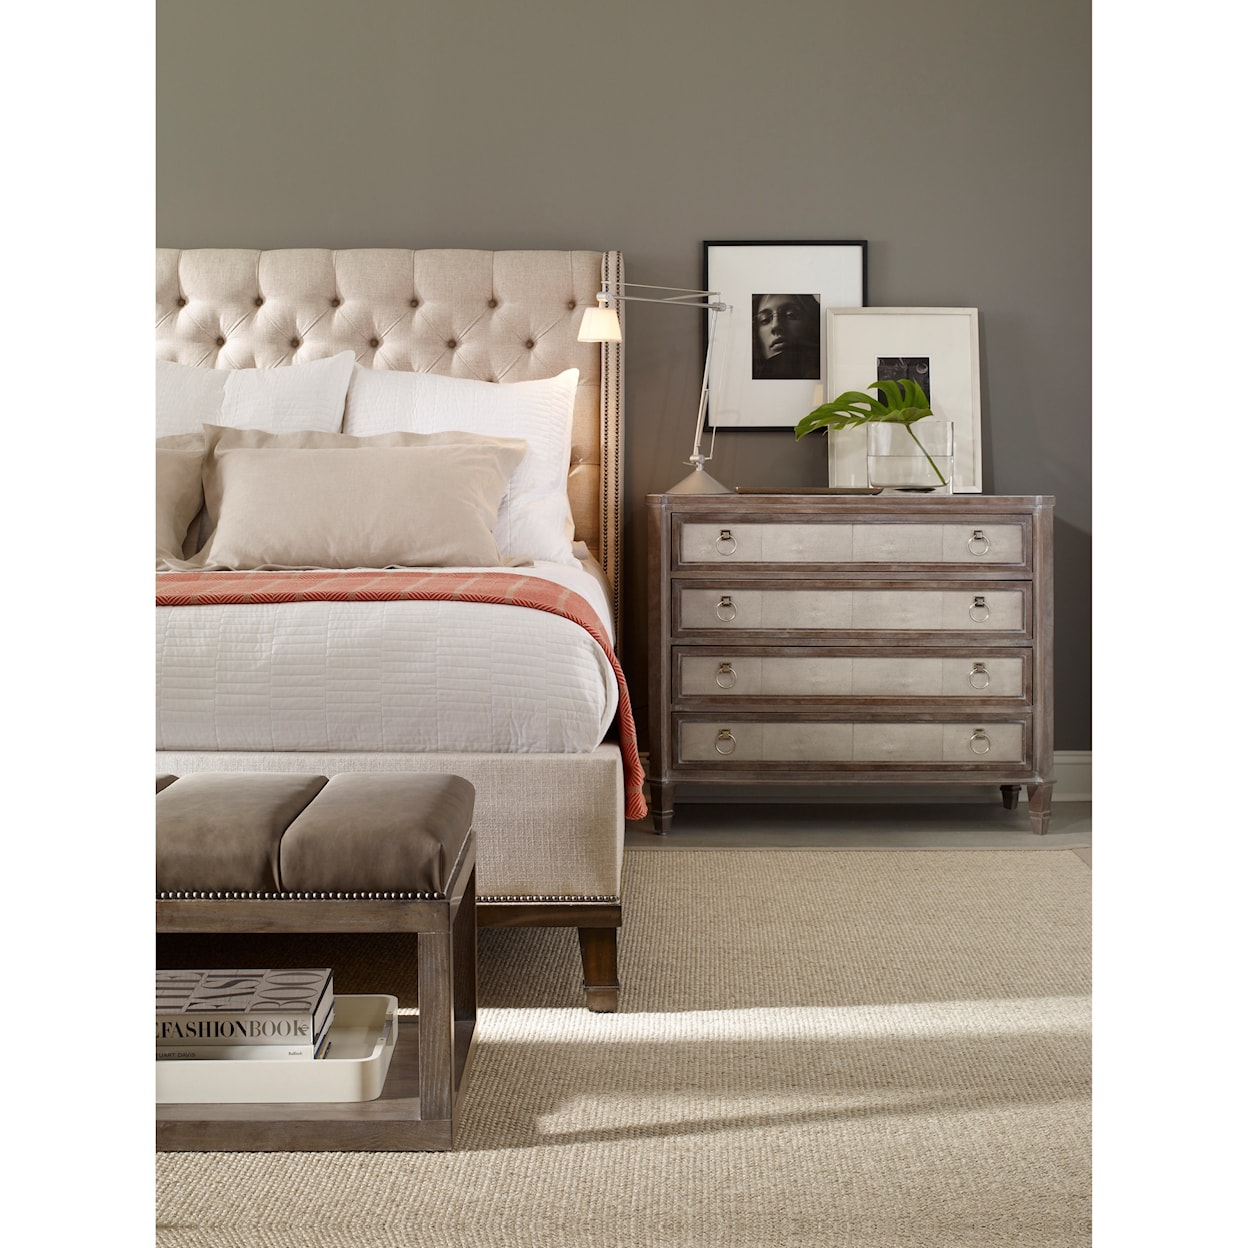 Vanguard Furniture Michael Weiss Cleo Cal King Bed